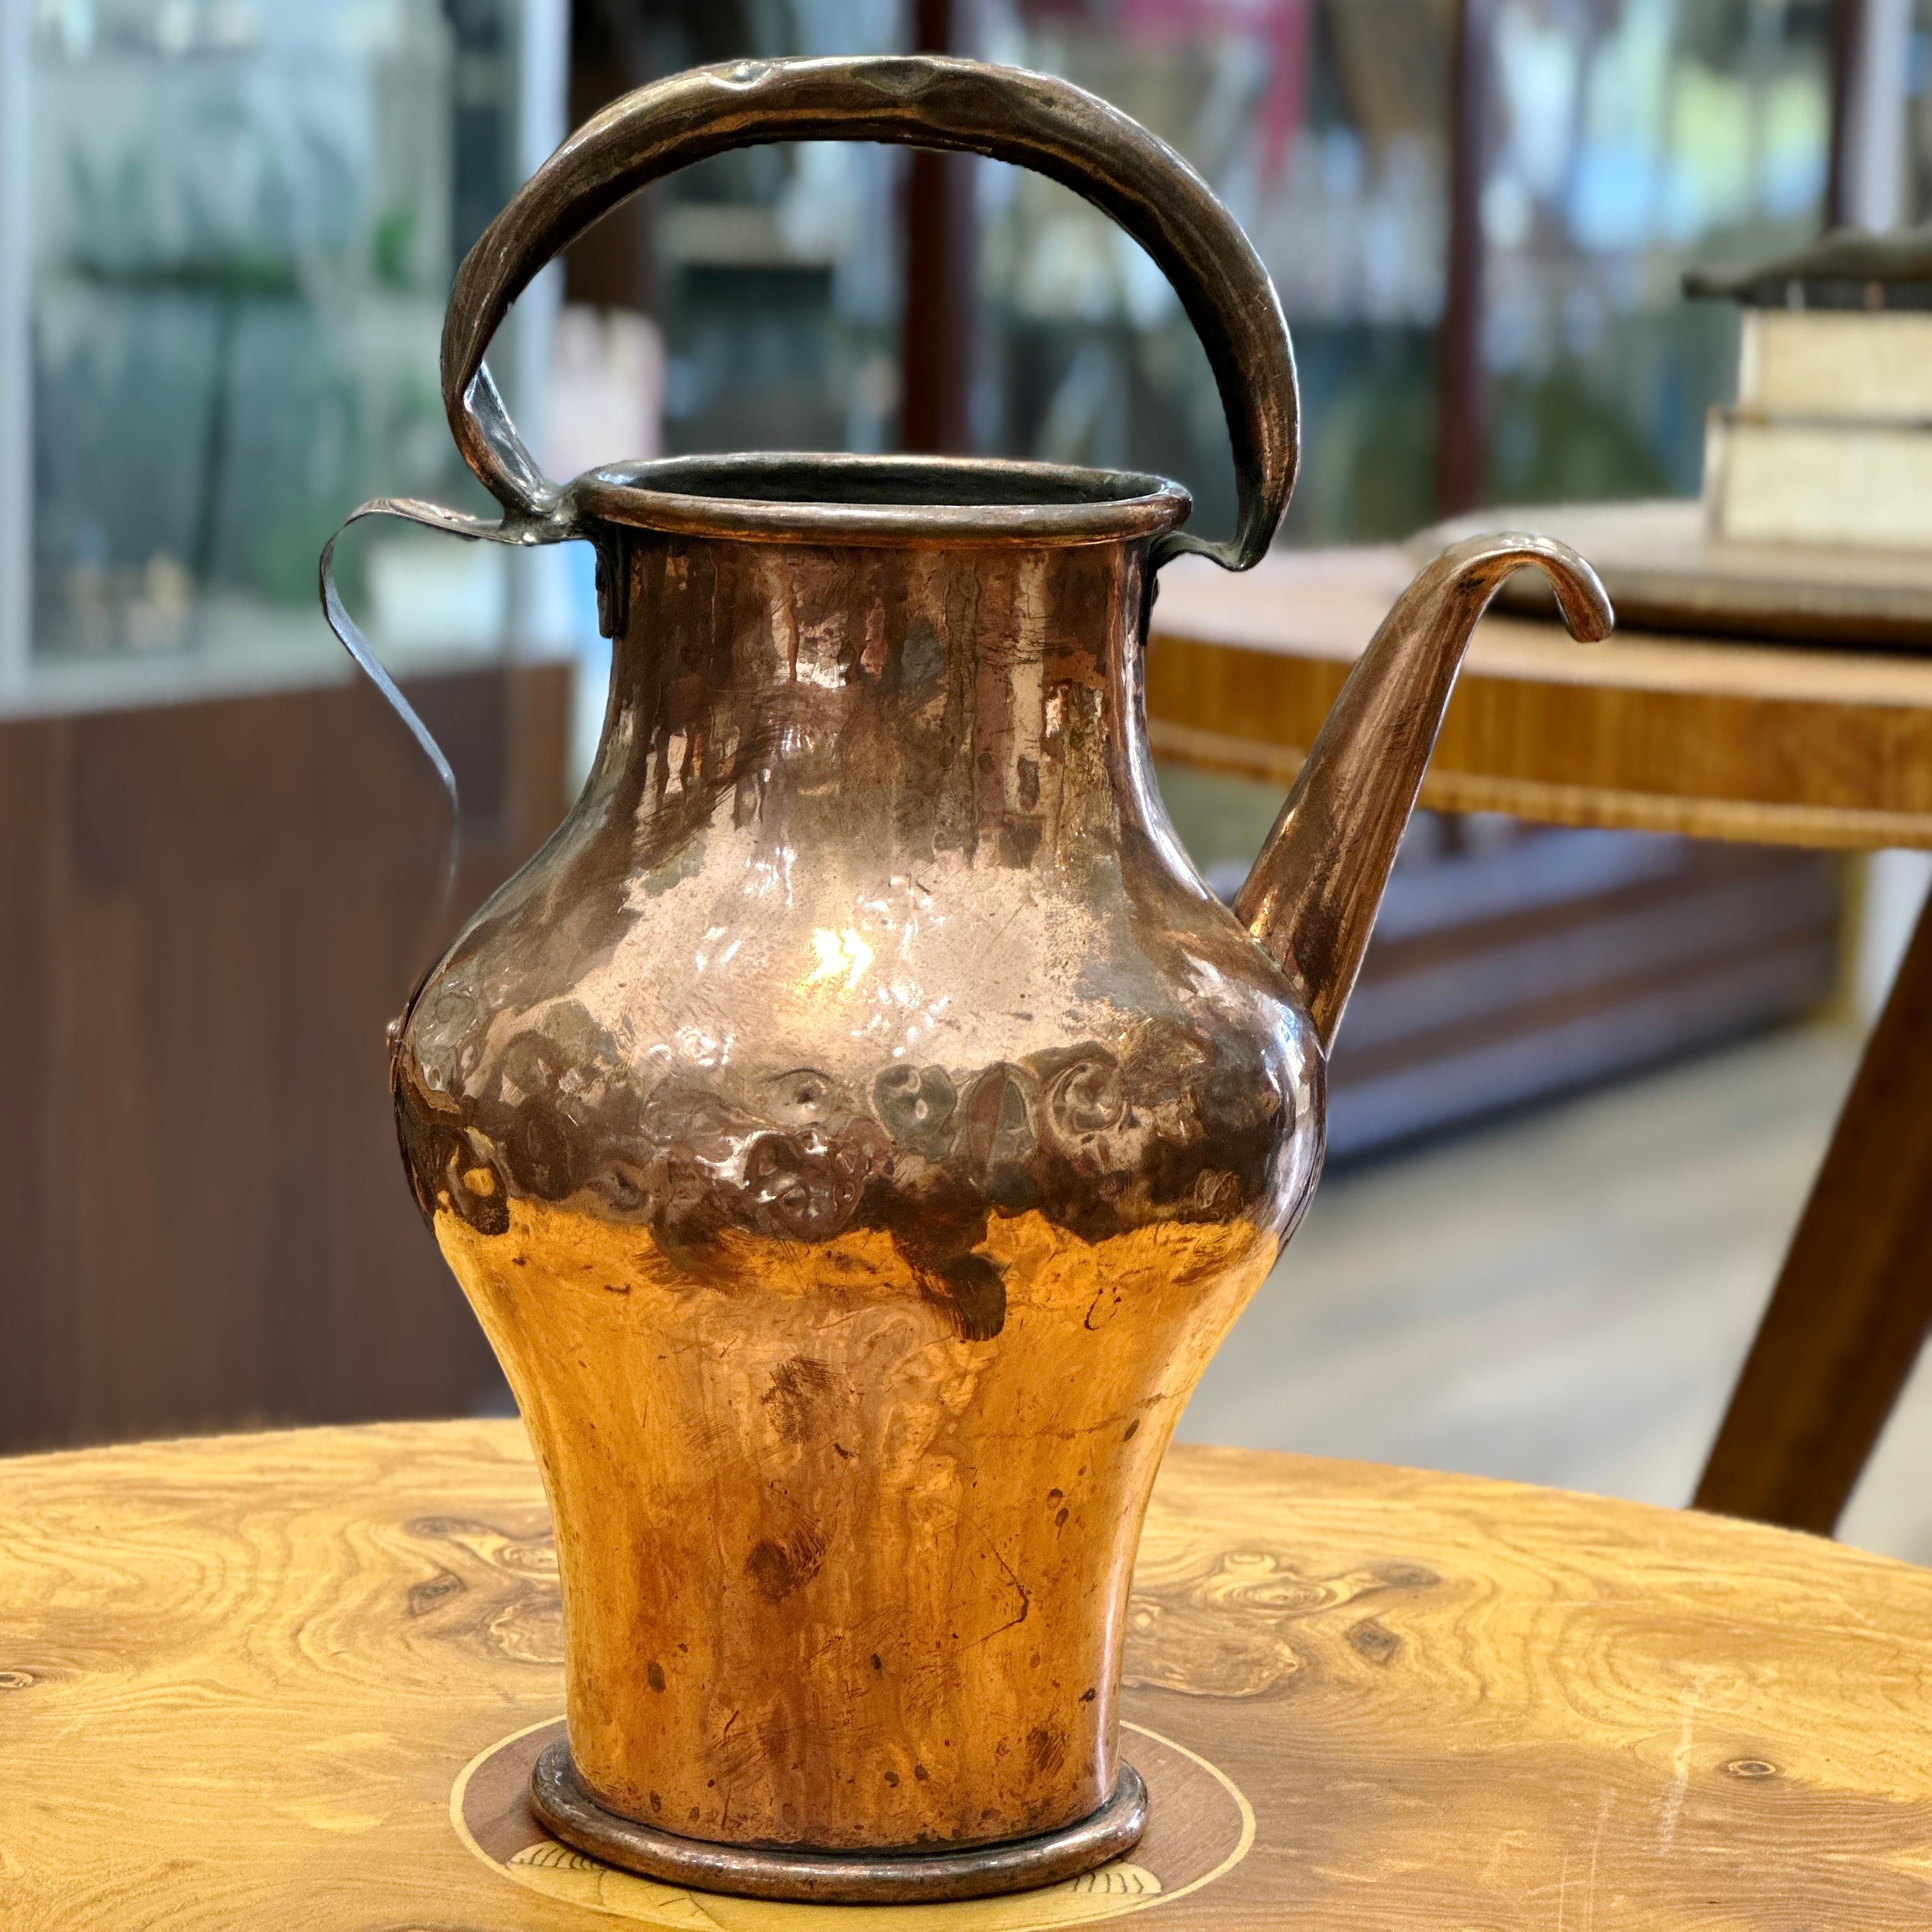 Here is a beautiful Antique French Copper Watering Can. This piece features a top and side handle and has a wonderful time worn patina. Watering can is water tight and ready to use for its intended purpose or simply as a decorative piece in your